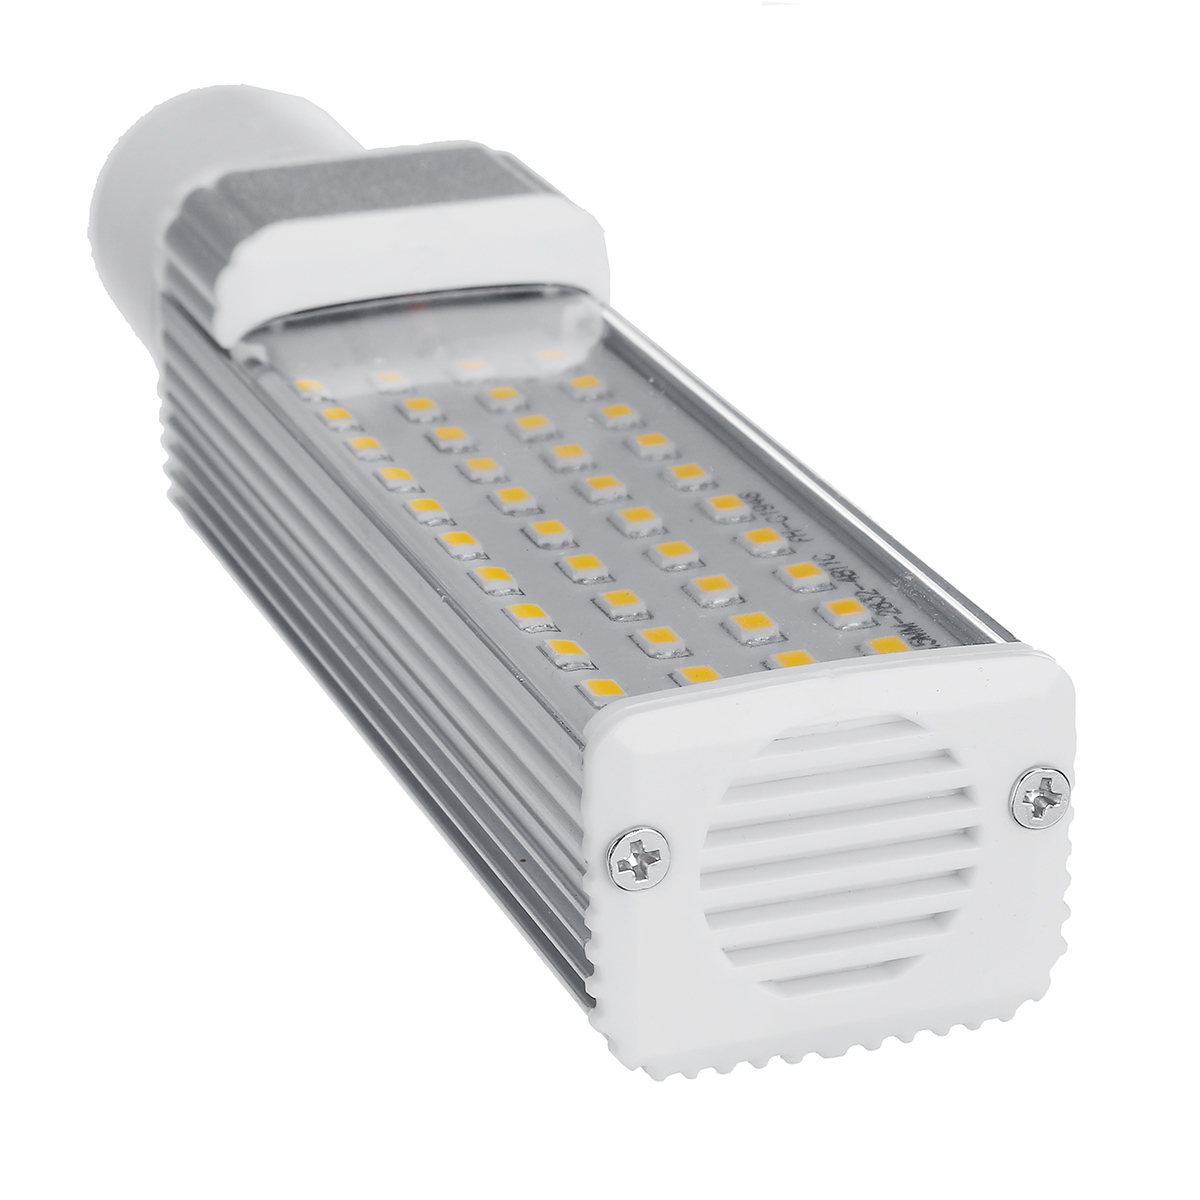 455060W-LED-Grow-Light-Lamp-Full-Spectrum-Hydroponic-Flower-Bloom-LED-Fitolampy-Grow-Lights-For-Hydr-1816389-10